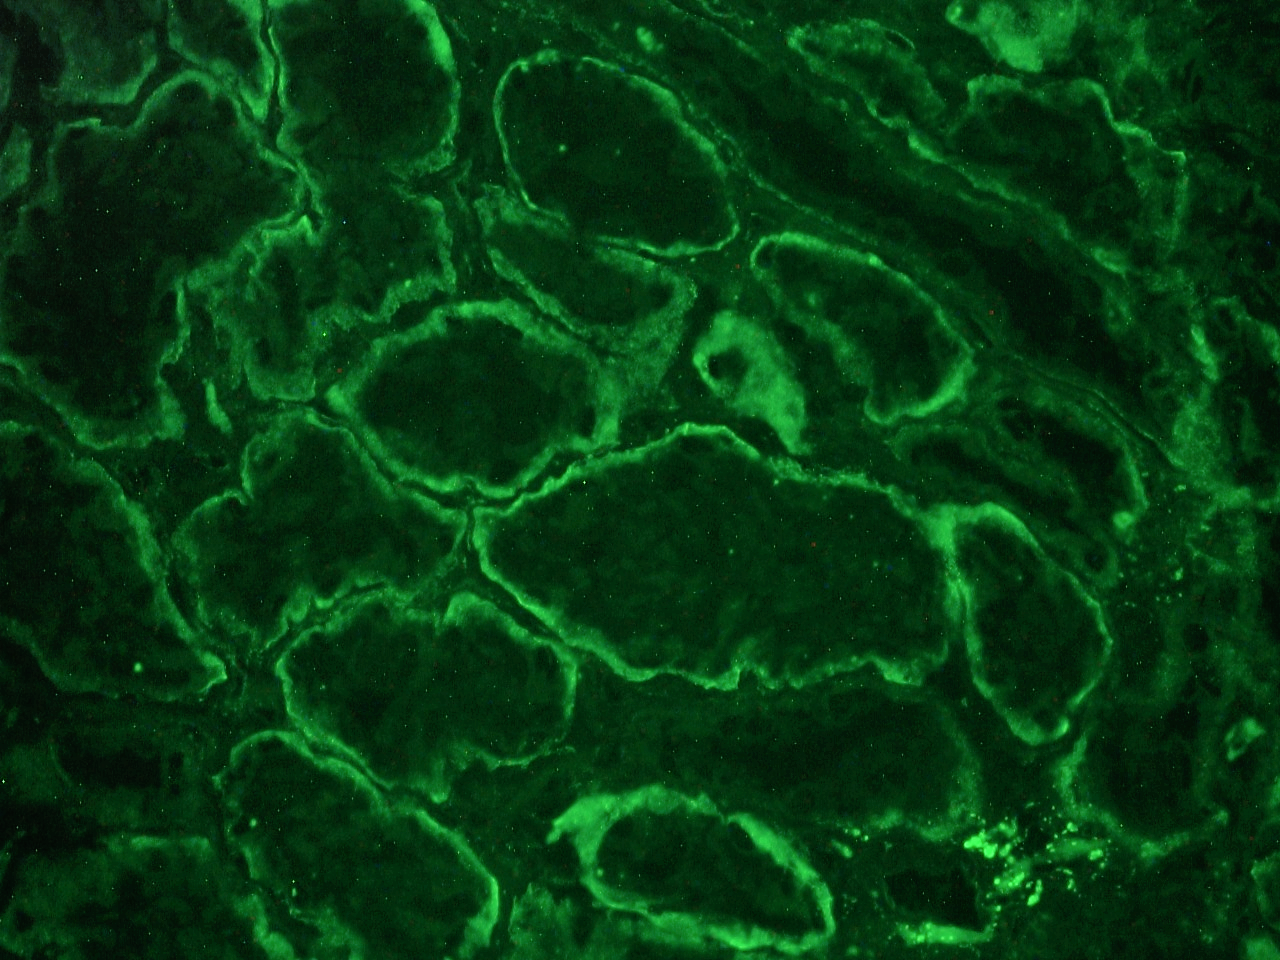 Figure 2: Integrin alpha 6B immunostaining of the basolateral membrane of epithelial cells in a frozen section of human kidney using MUB0905P at a 1:100 dilution.